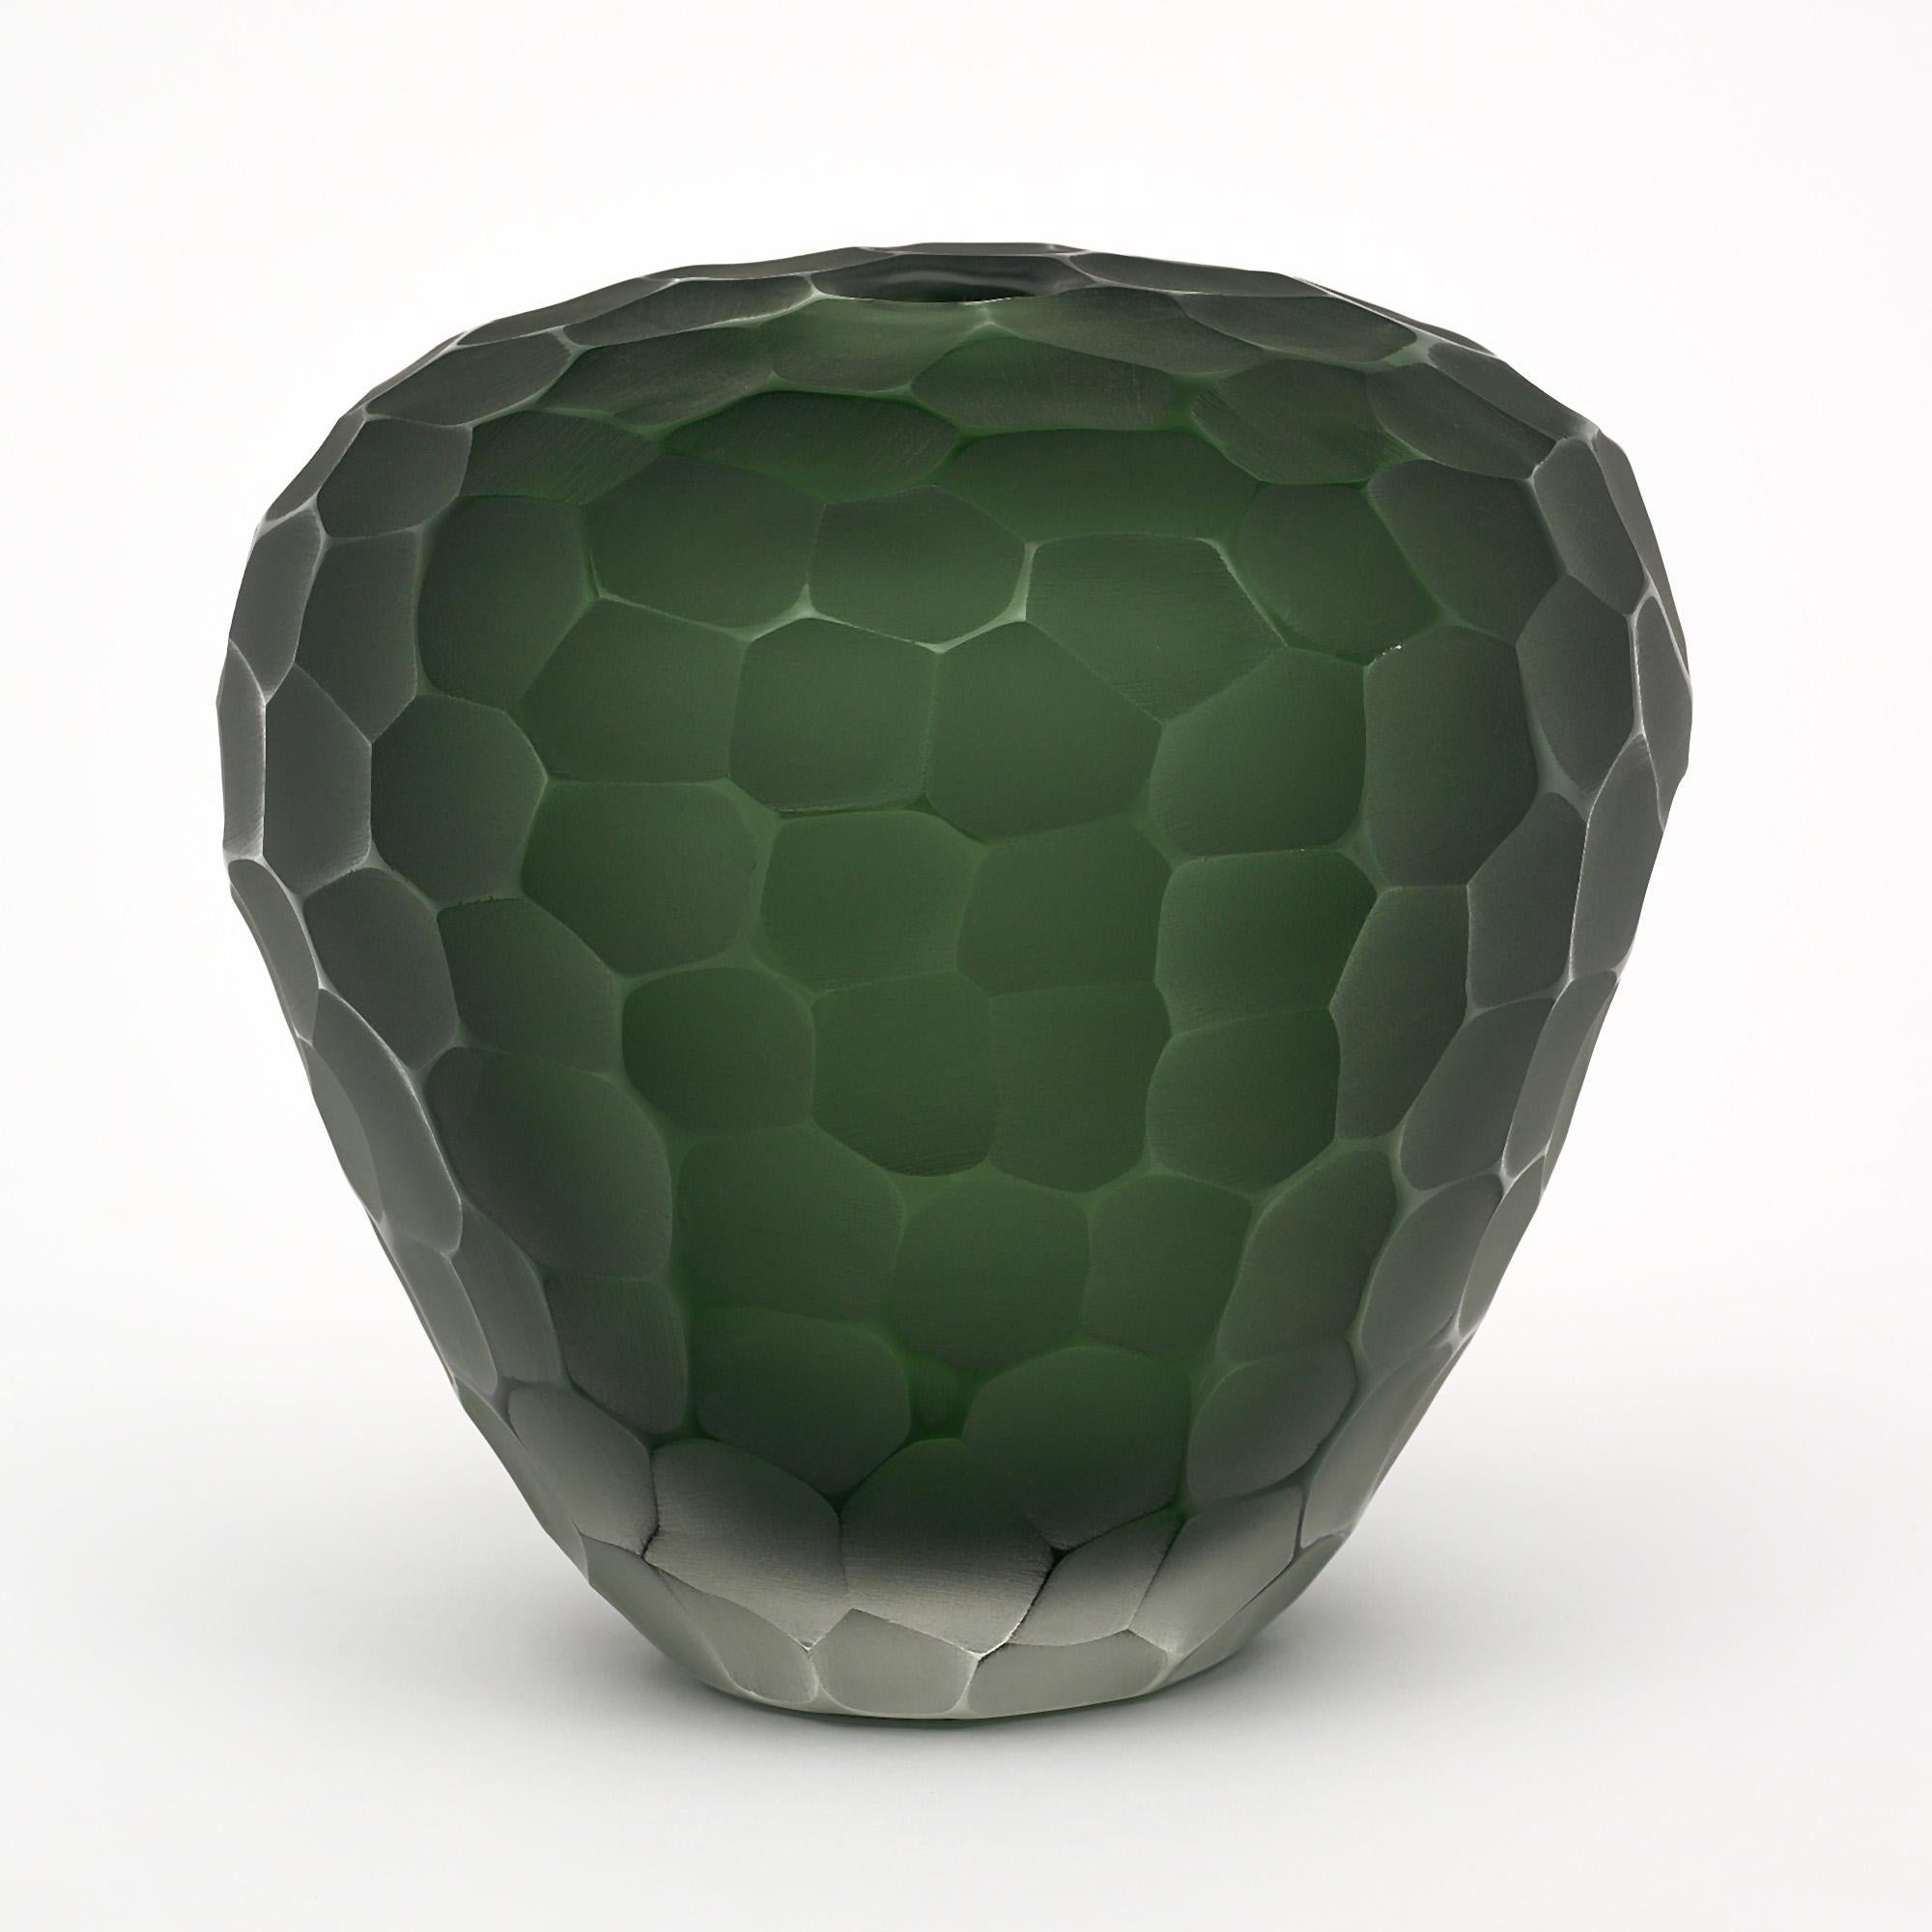 Vase, Italian, from the island of Murano. This hand-blown piece is made of deep hunter green glass in the hammered “battuto” style. In the manner of Ettoree Sottsass. Signed by glass maestro Alberto Dona.